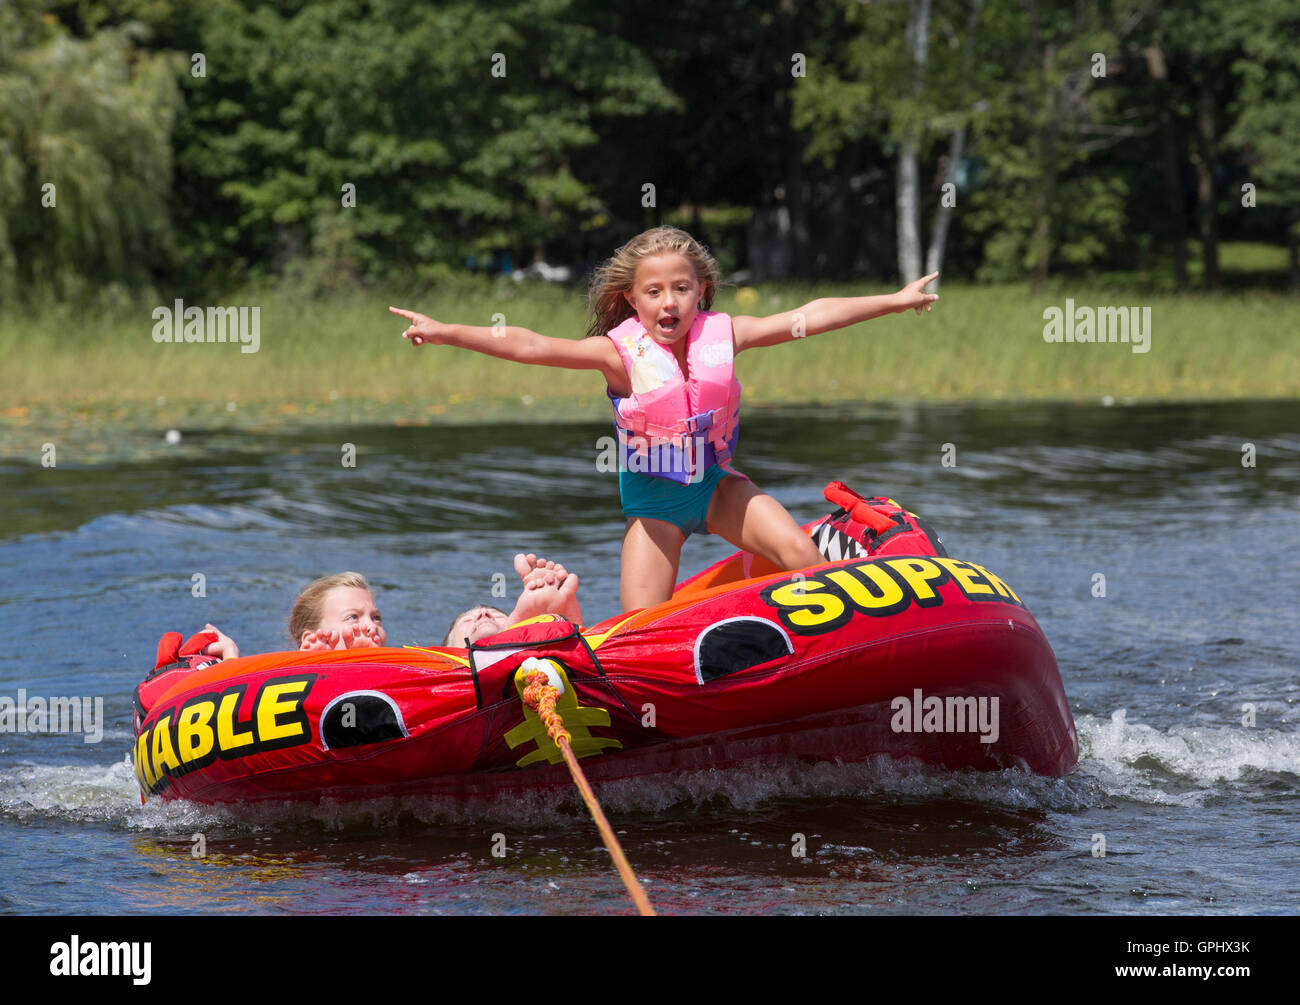 A young girl stands on an inflatable ride being pulled behind a speedboat on Little Pine Lake in Minnesota Stock Photo